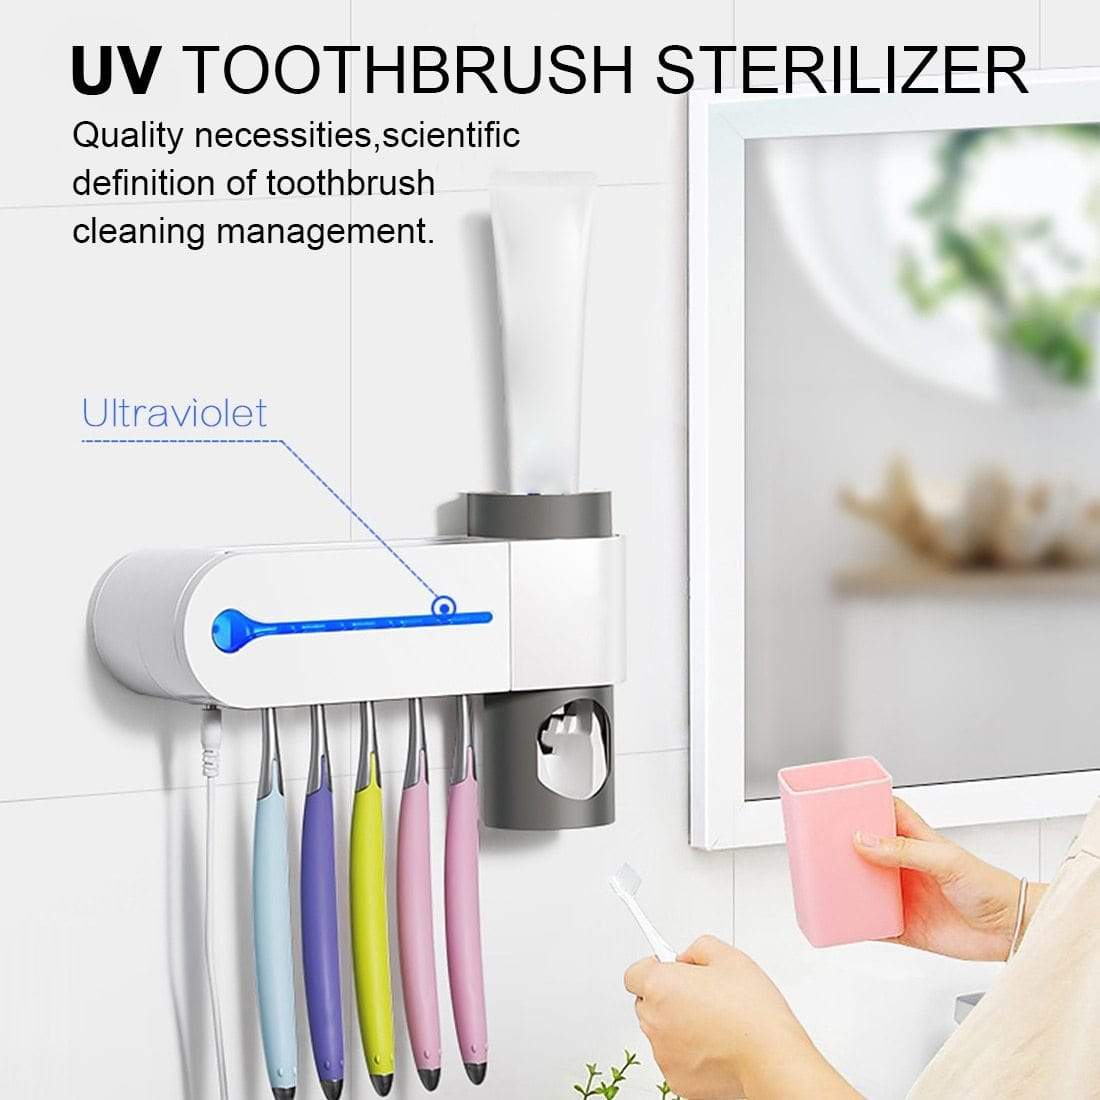 smartnliving UVToothMaster - UV Toothbrush and Automatic Toothpaste Dispenser